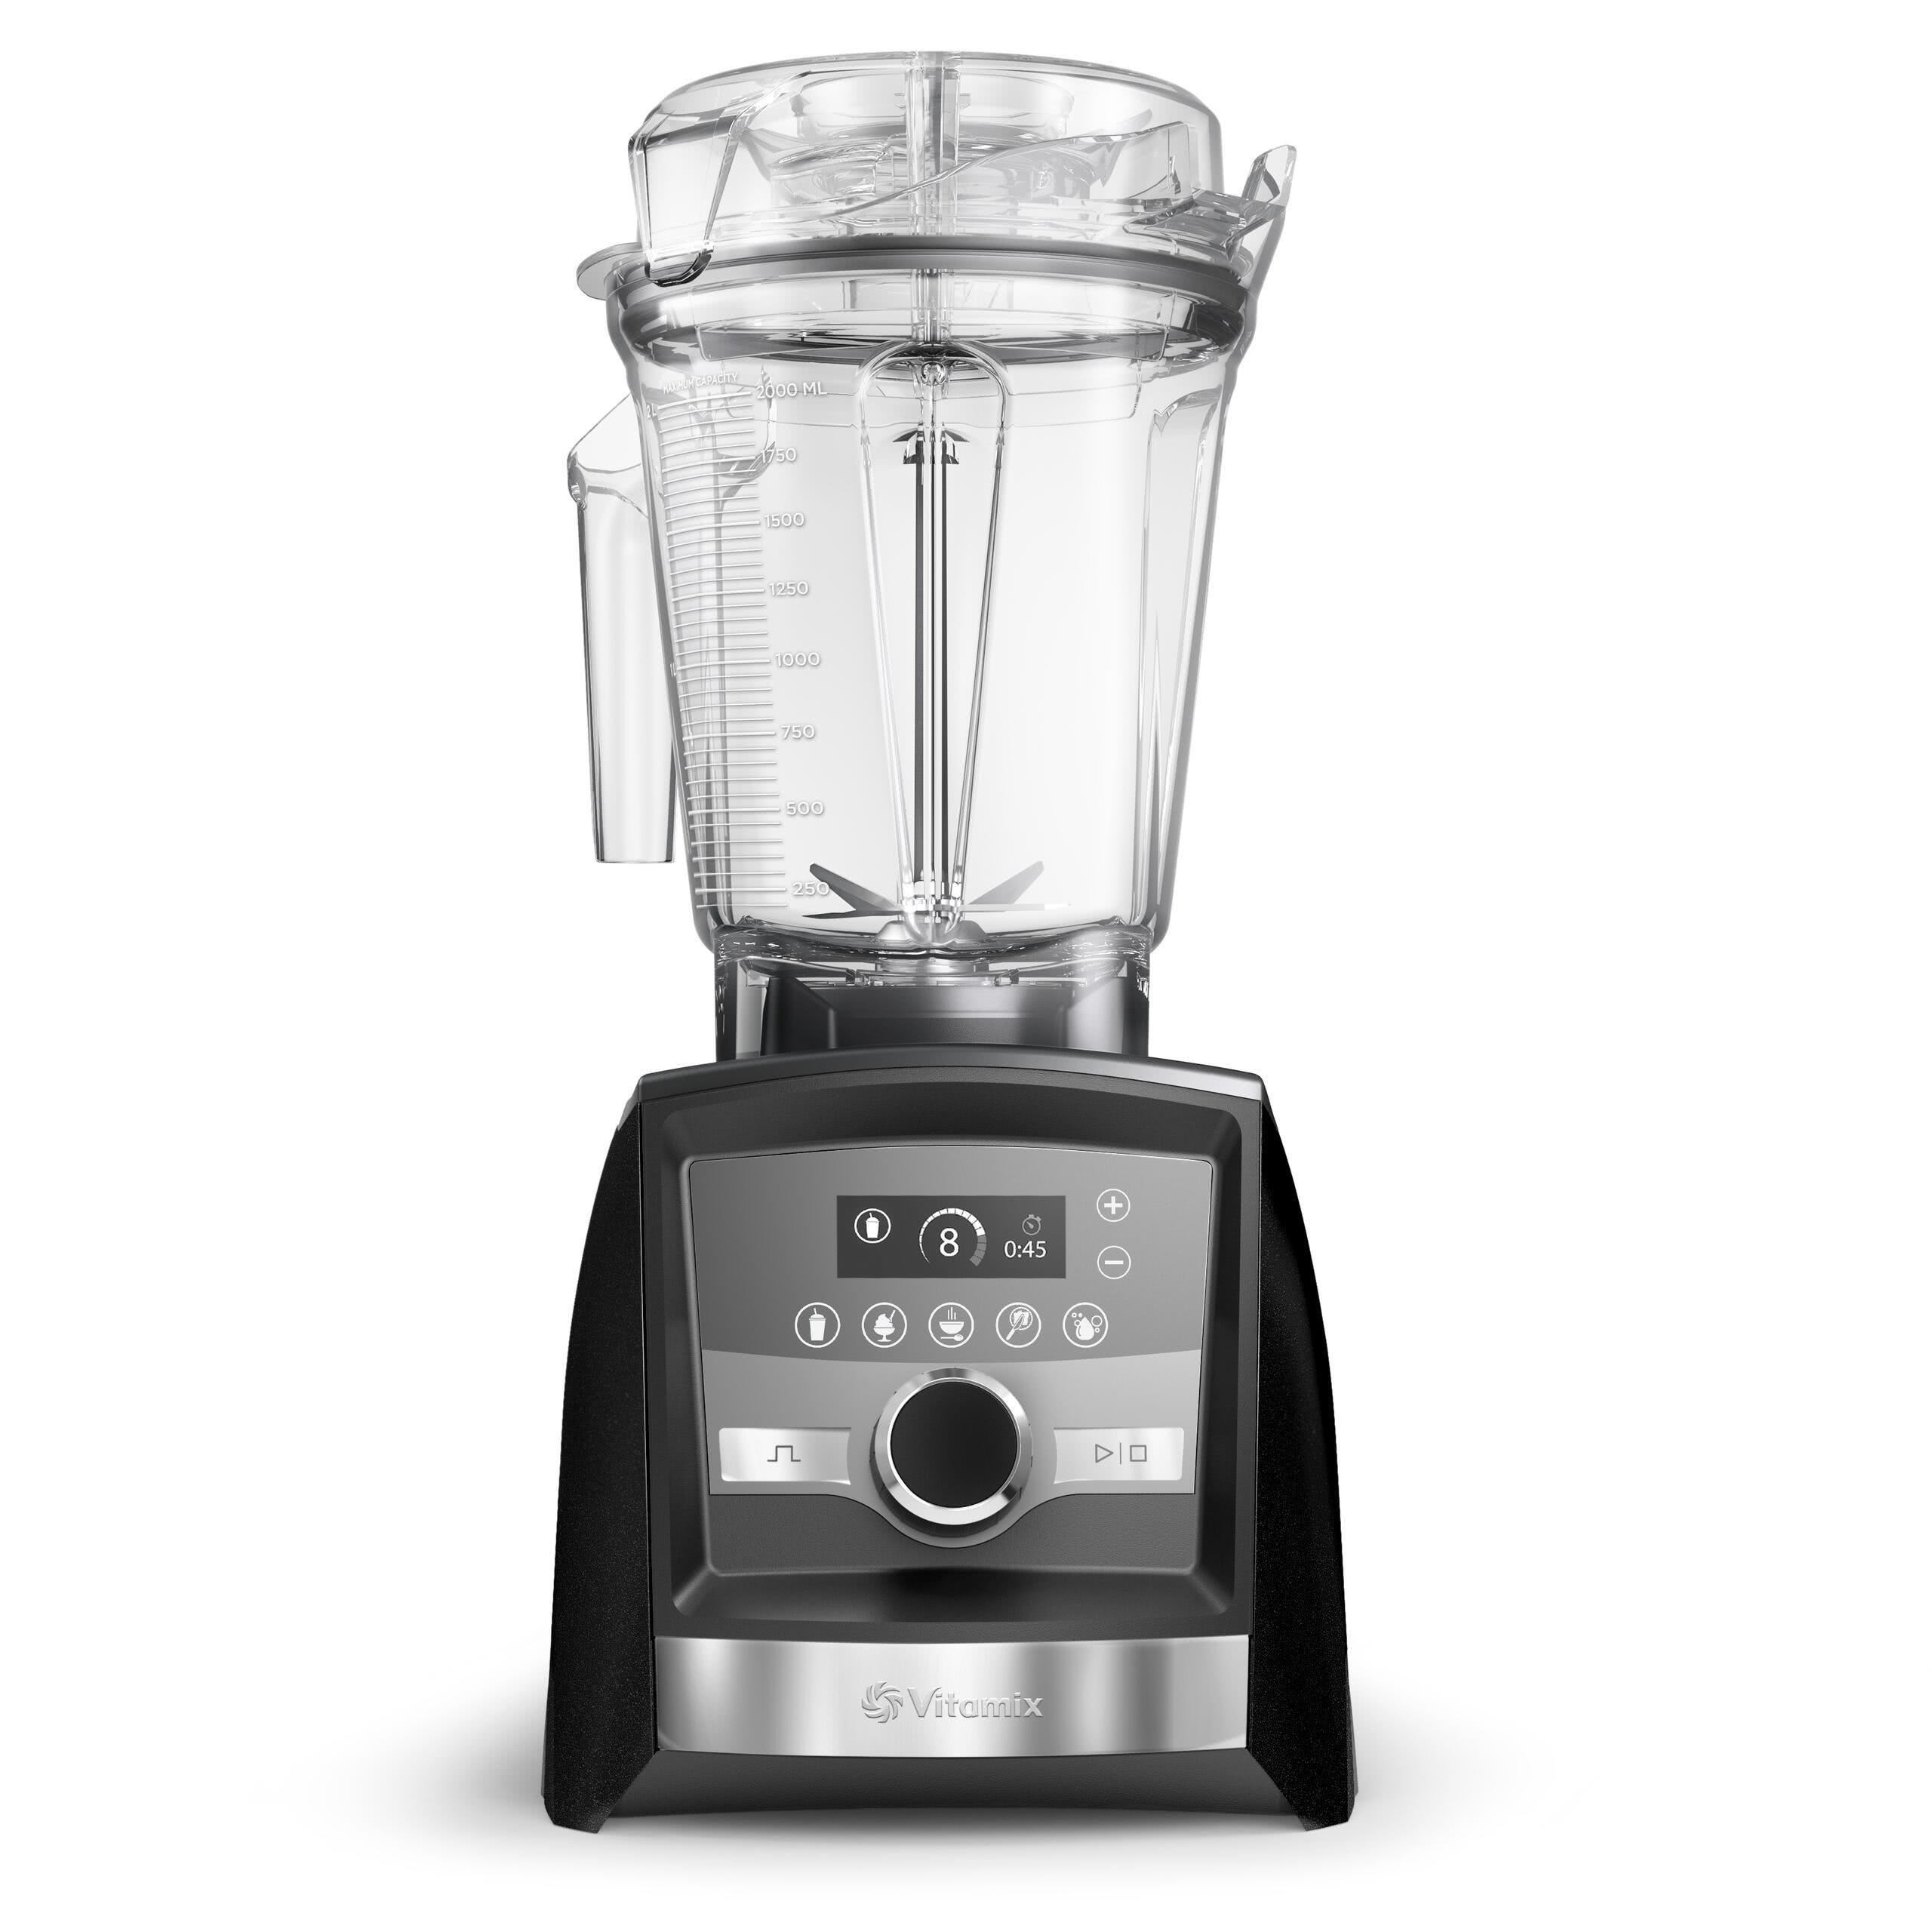 This KitchenAid Food Processor Is 43 Percent Off Today - 's Deal of  the Day November 12, 2018 